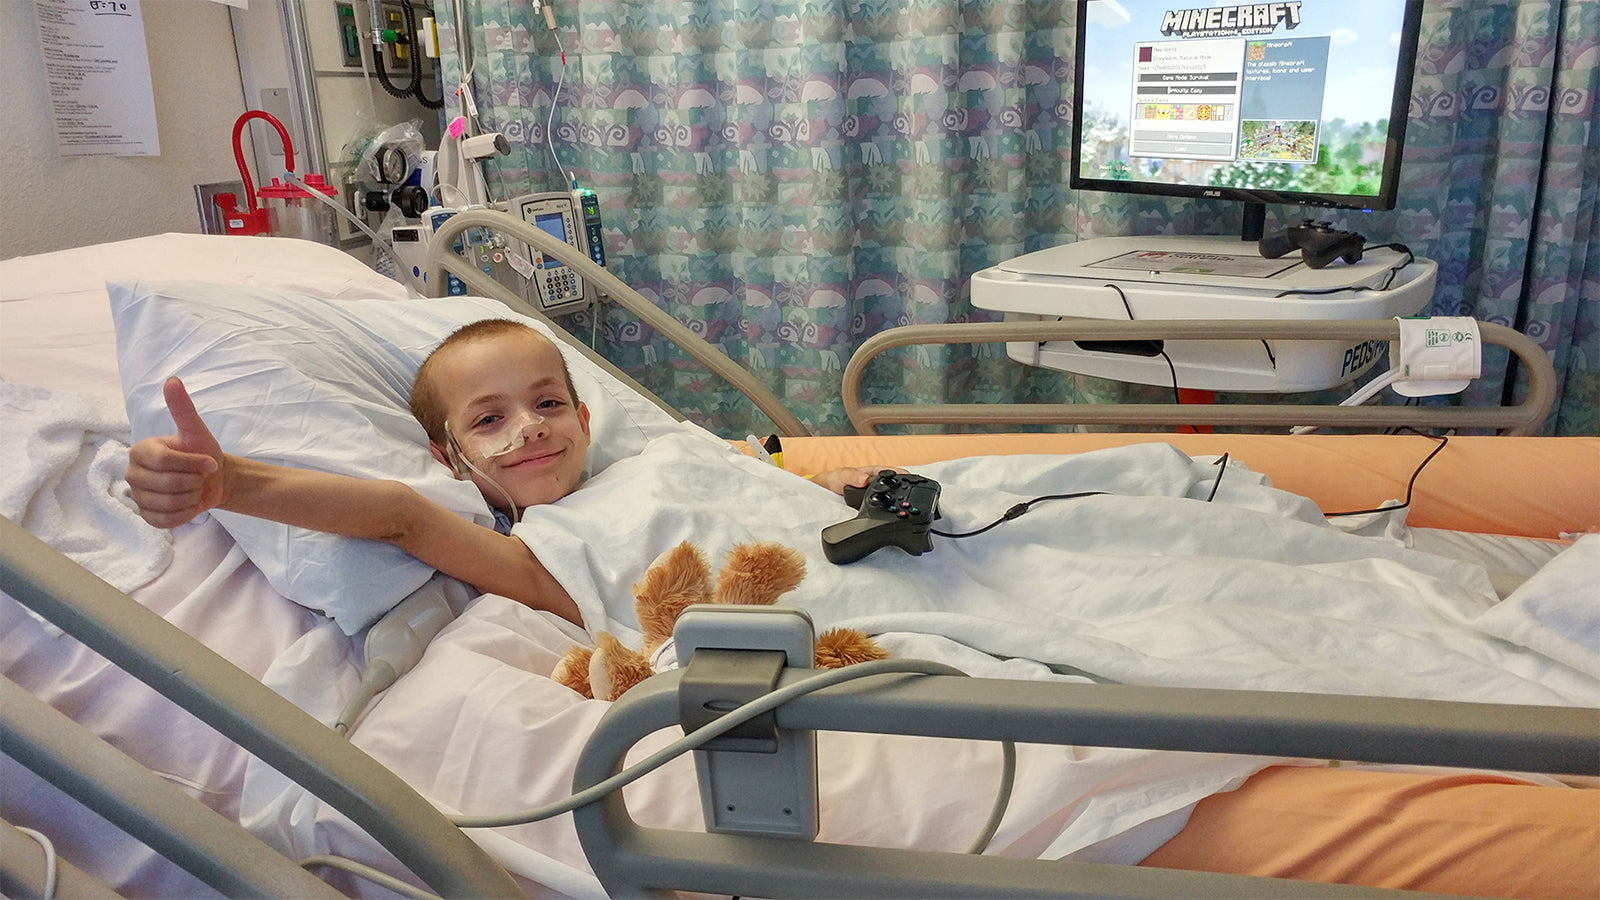 A child in care at a hospital, smiling and giving a thumbs up while playing video games